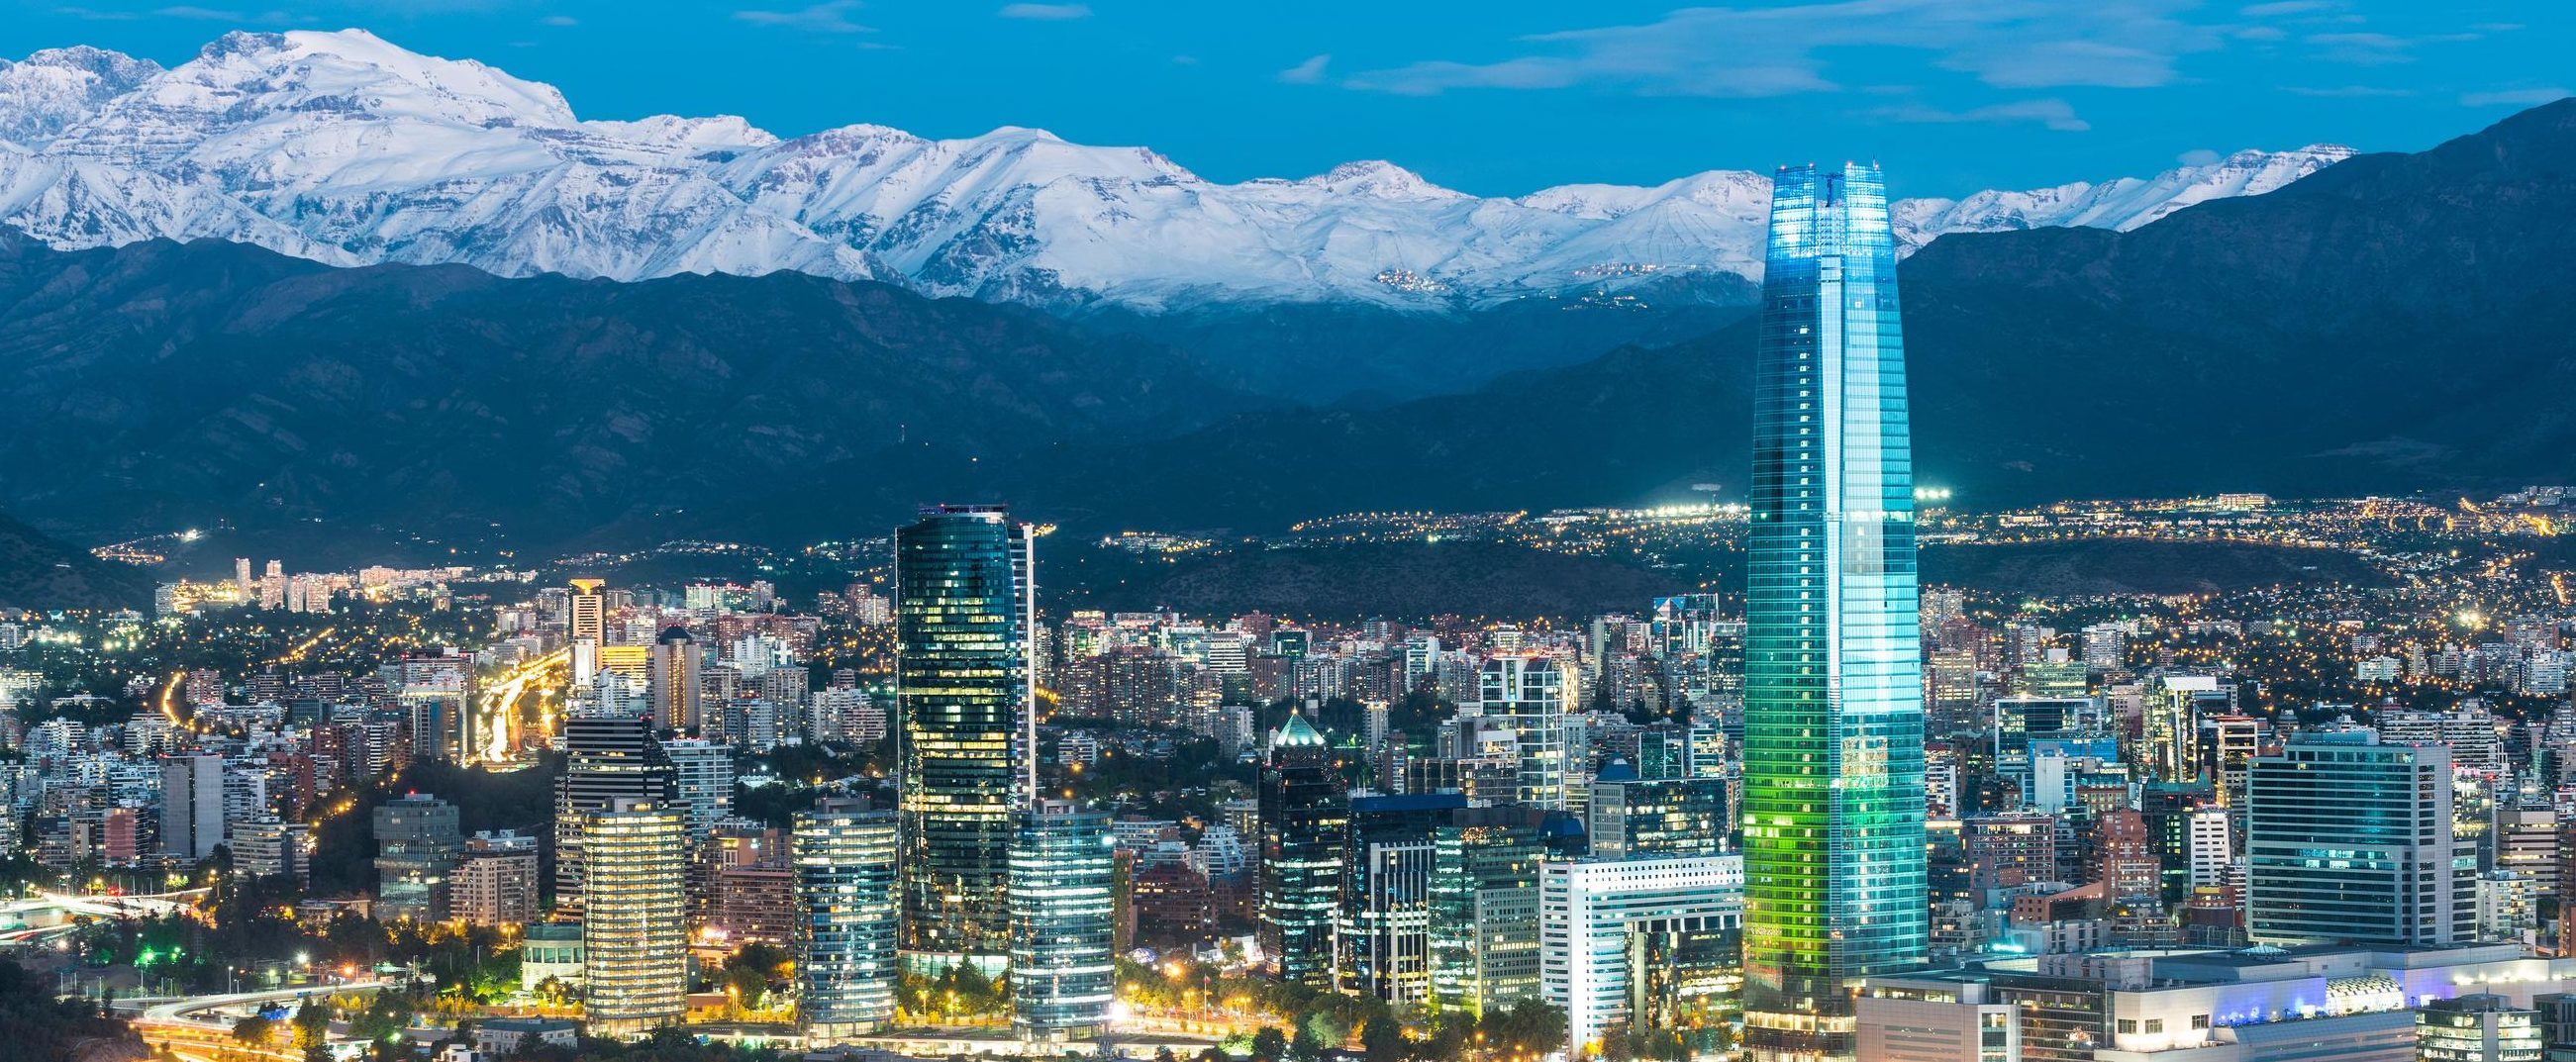 Wineries, Record Stores, Art Museums, Hotels, and All You Need for the  Perfect Weekend in Santiago, Chile